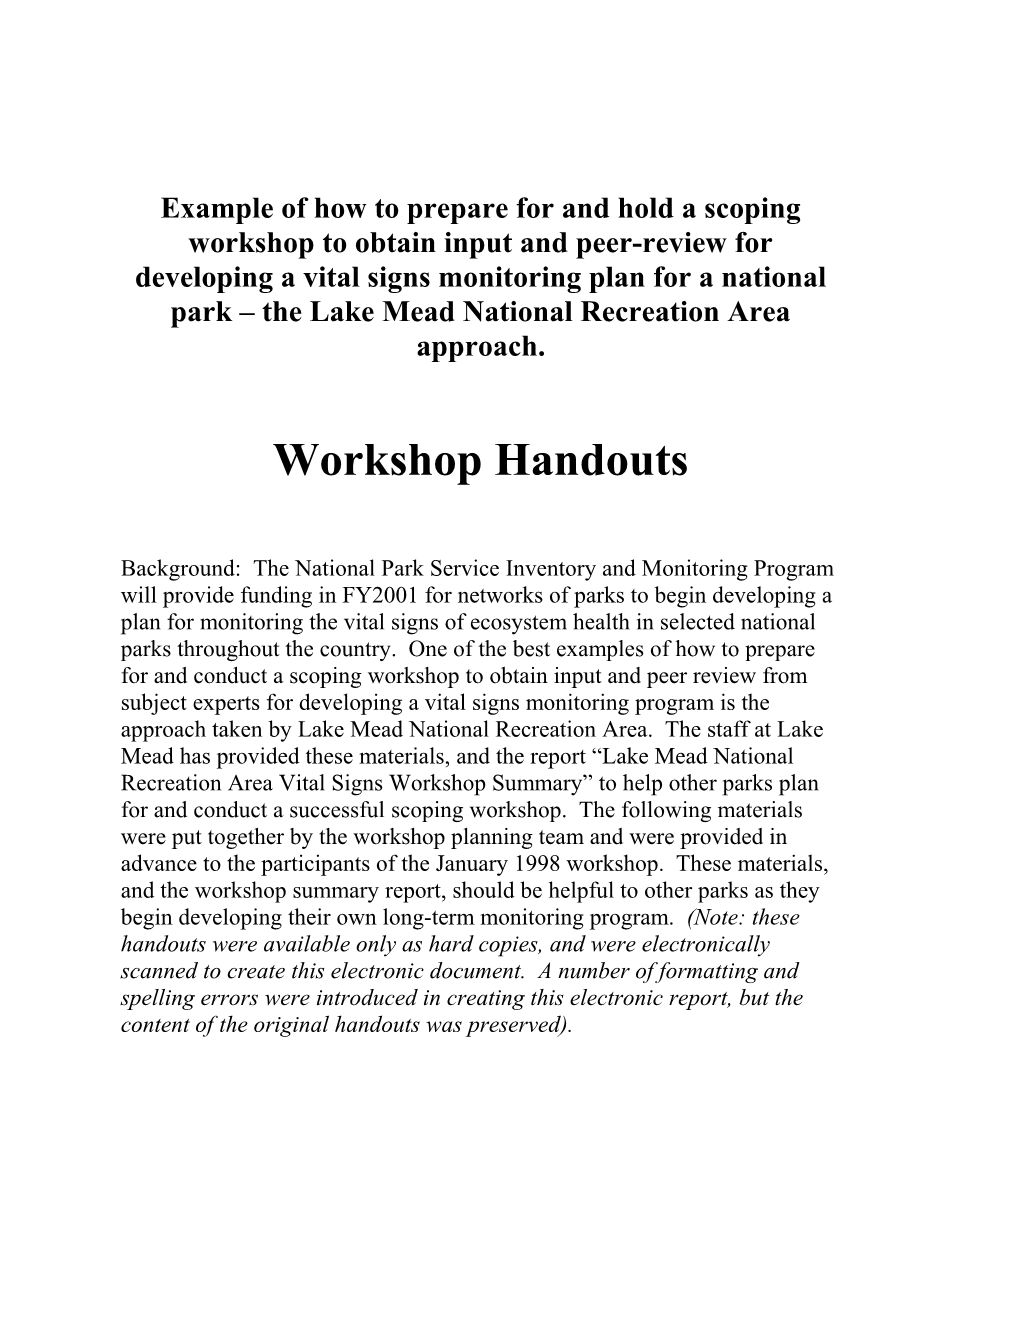 Example of How to Prepare for and Hold a Scoping Workshop to Obtain Input and Peer-Review